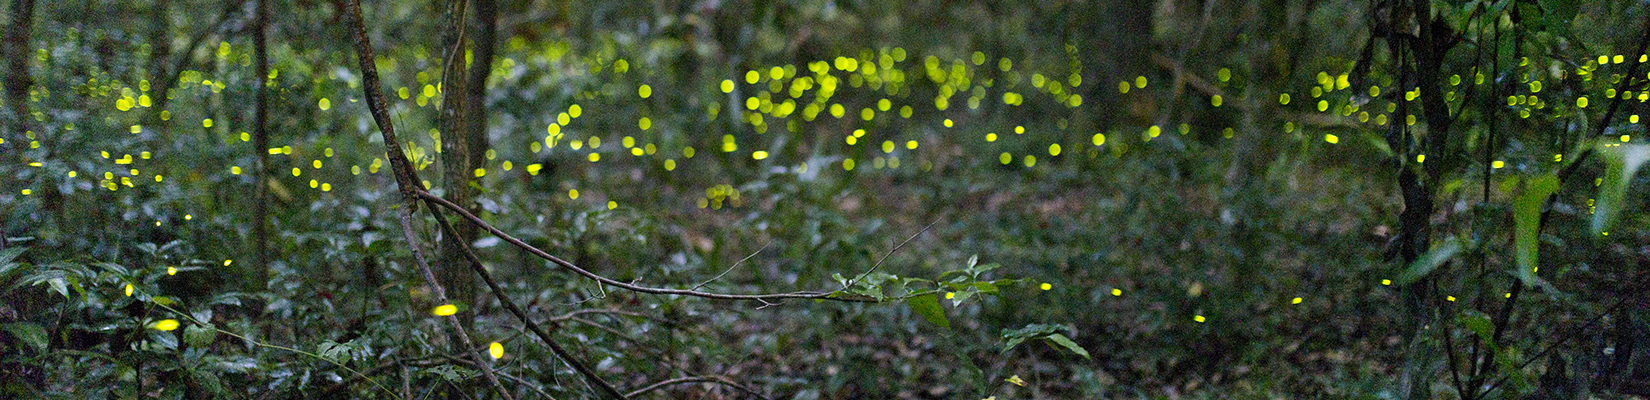 lightening bugs in the forest